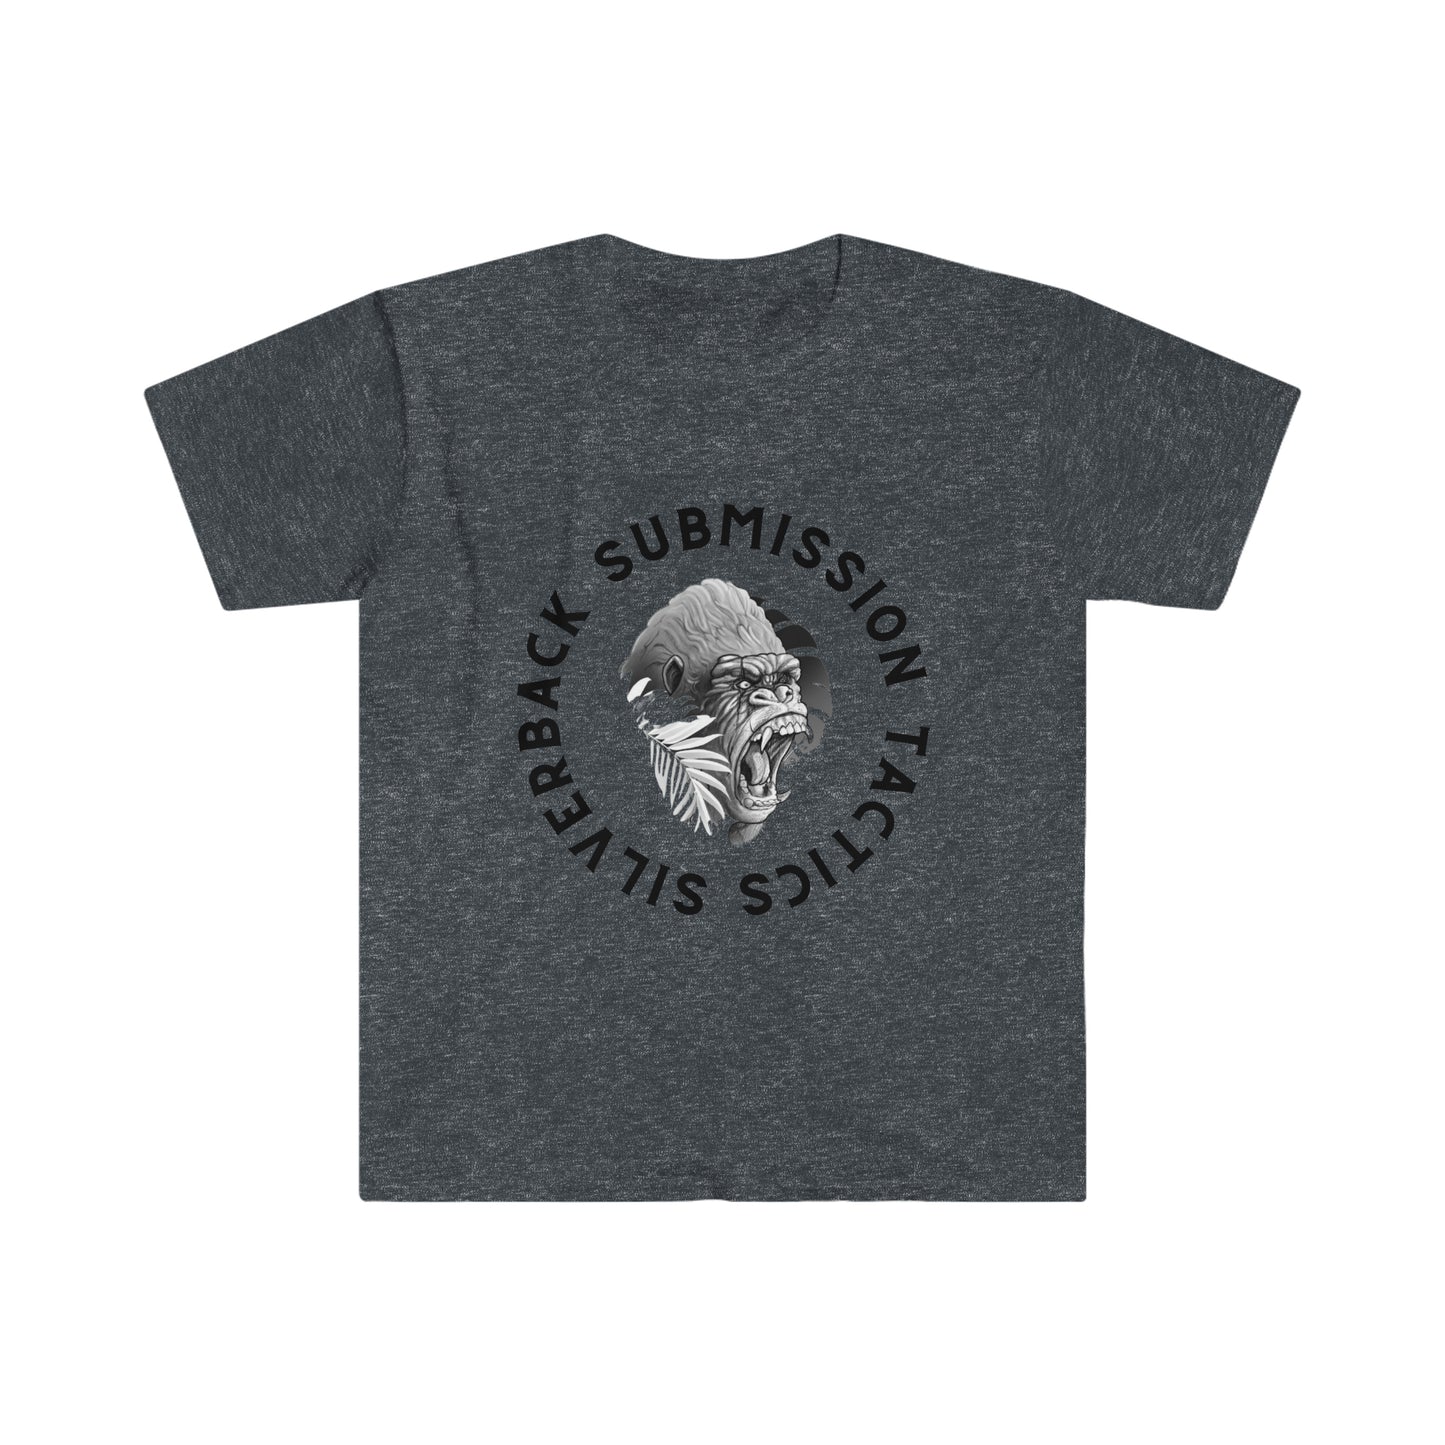 Unisex Silverback Submission Tactics Softstyle T-Shirt